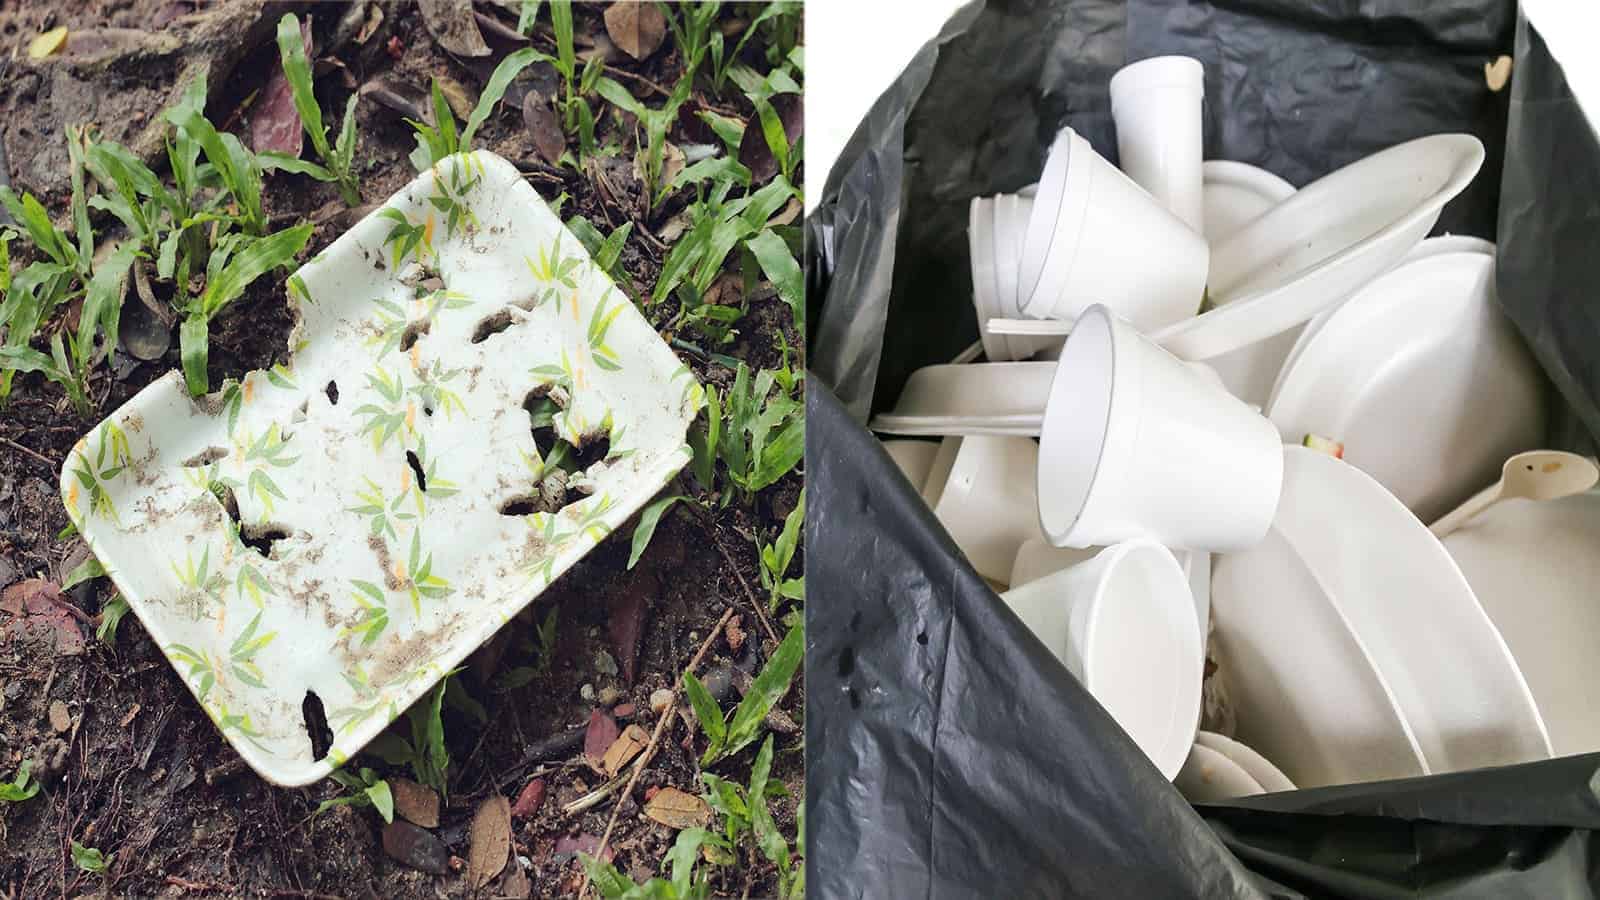 Maine Declares Ban on Styrofoam That Hurts the Environment